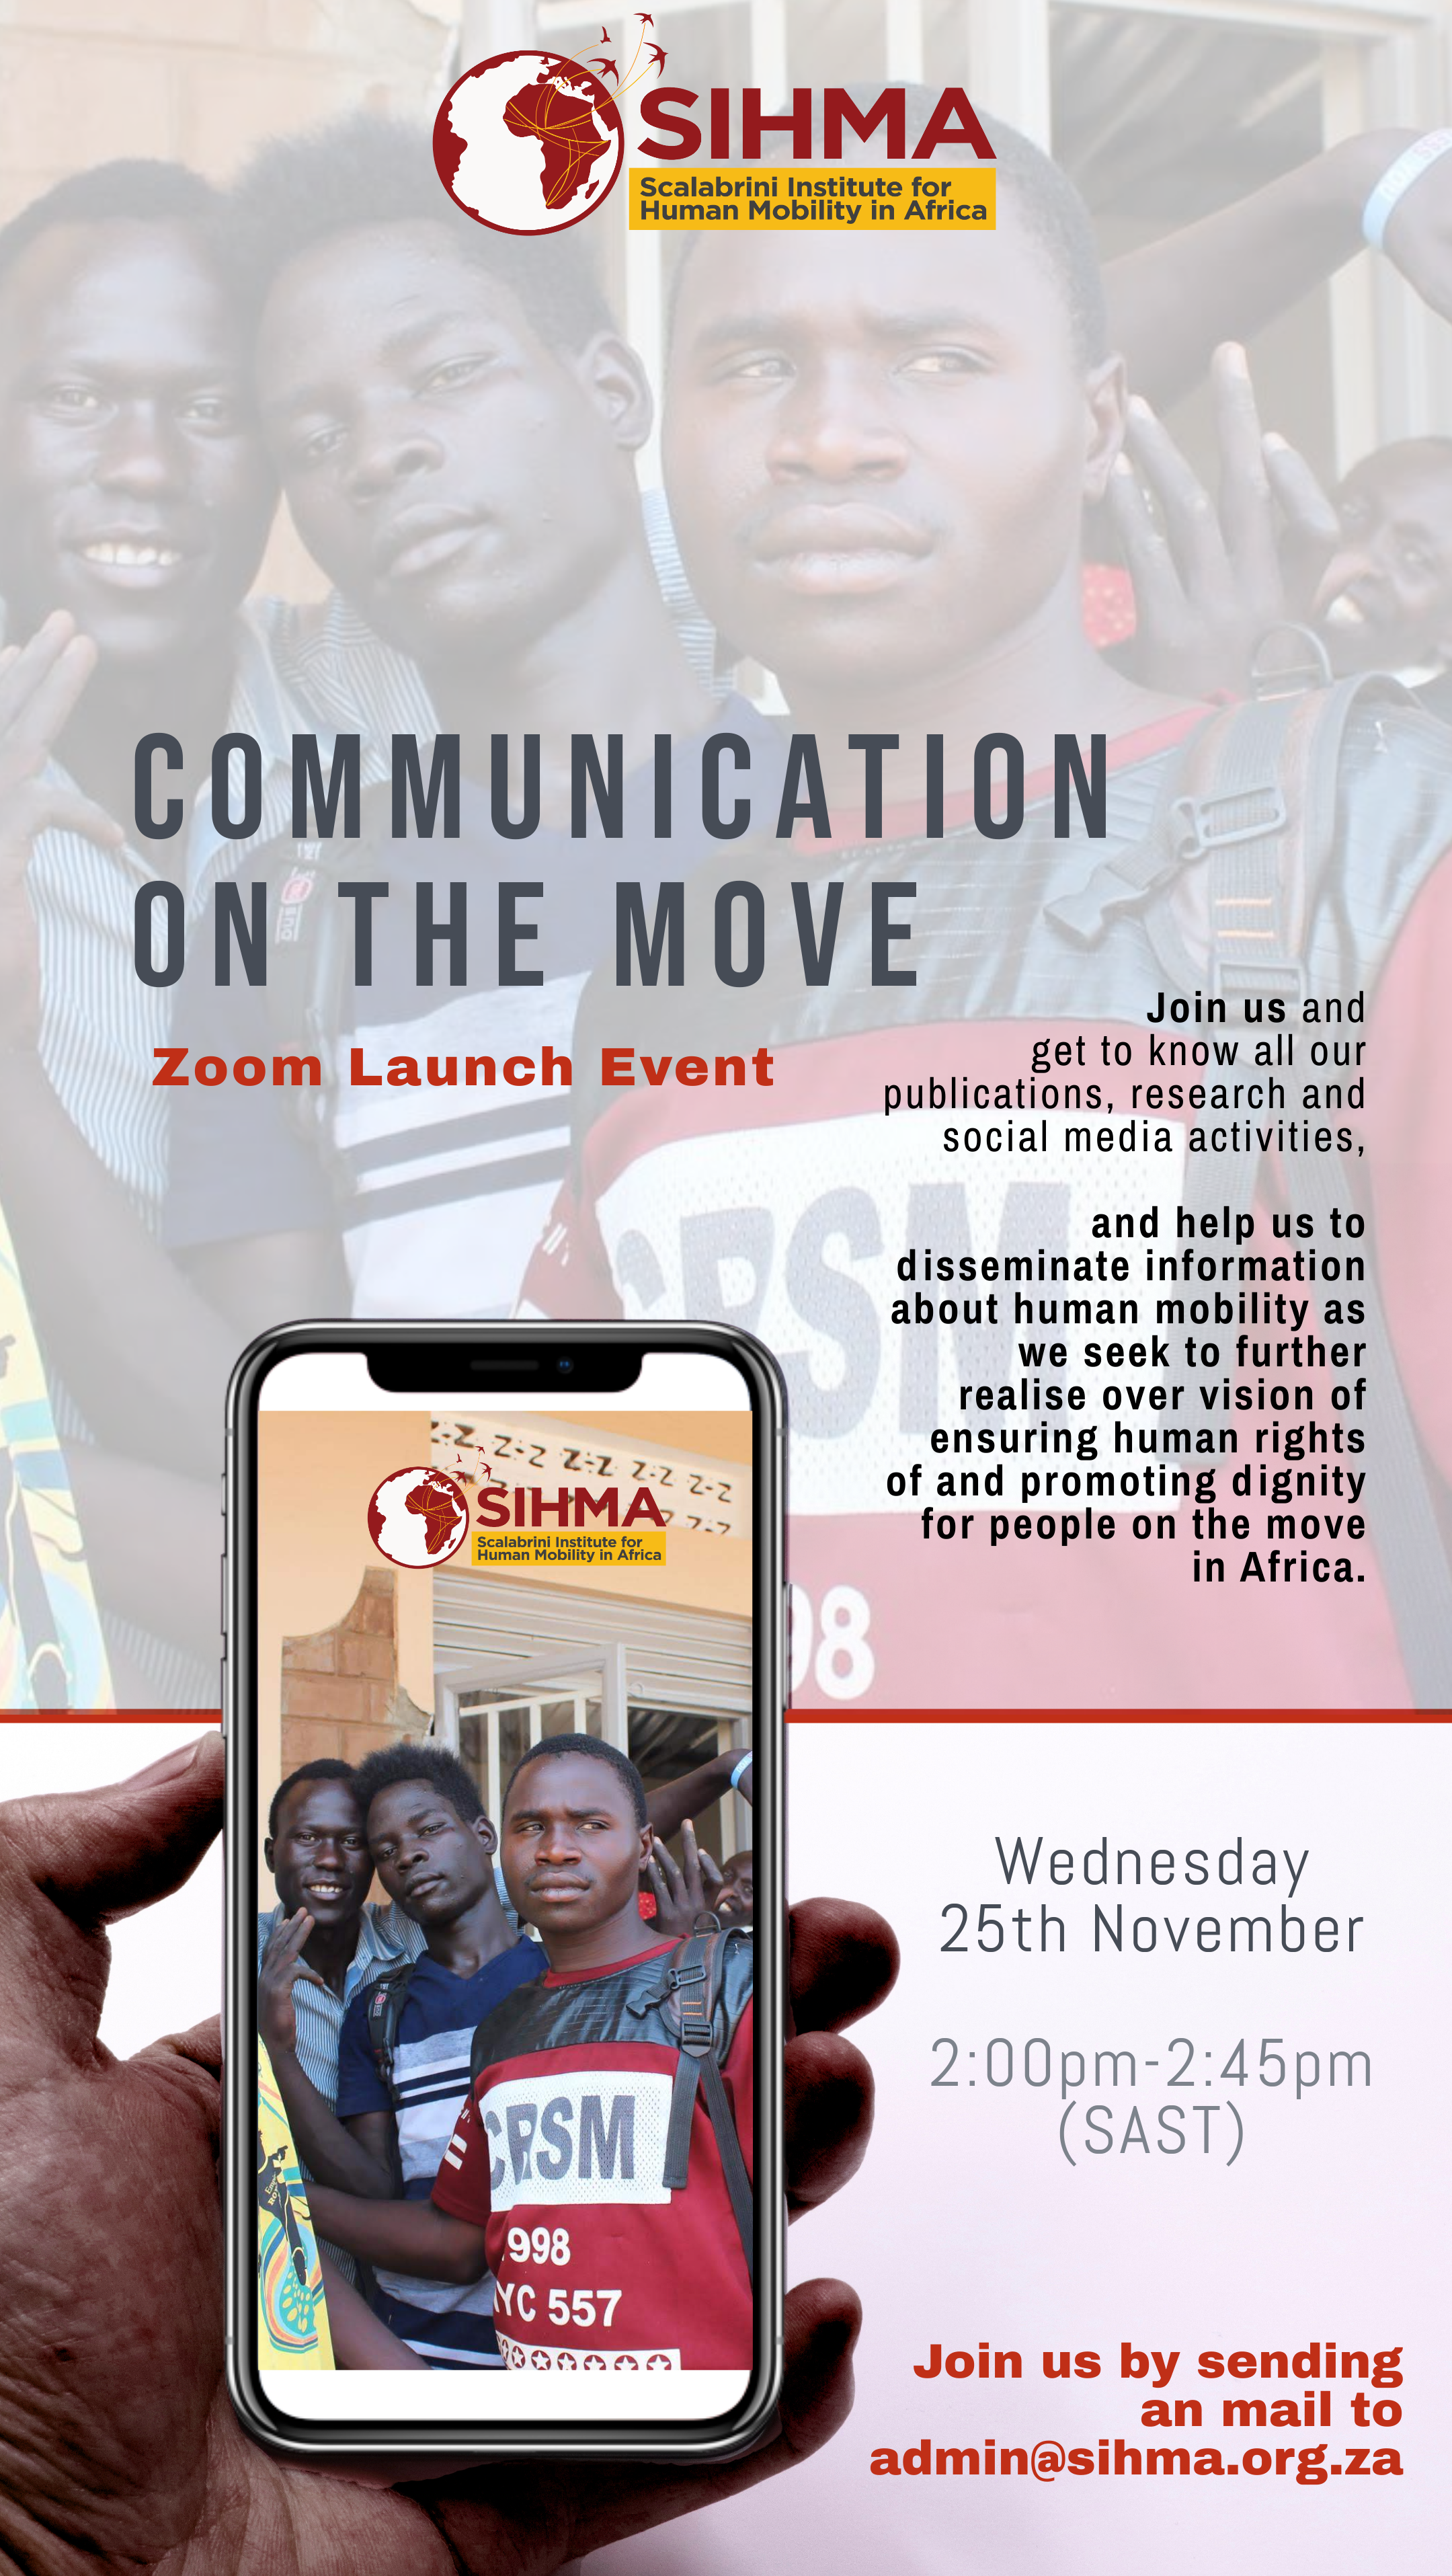 https://sihma.org.za/photos/shares/SIHMA Event Invitation.png